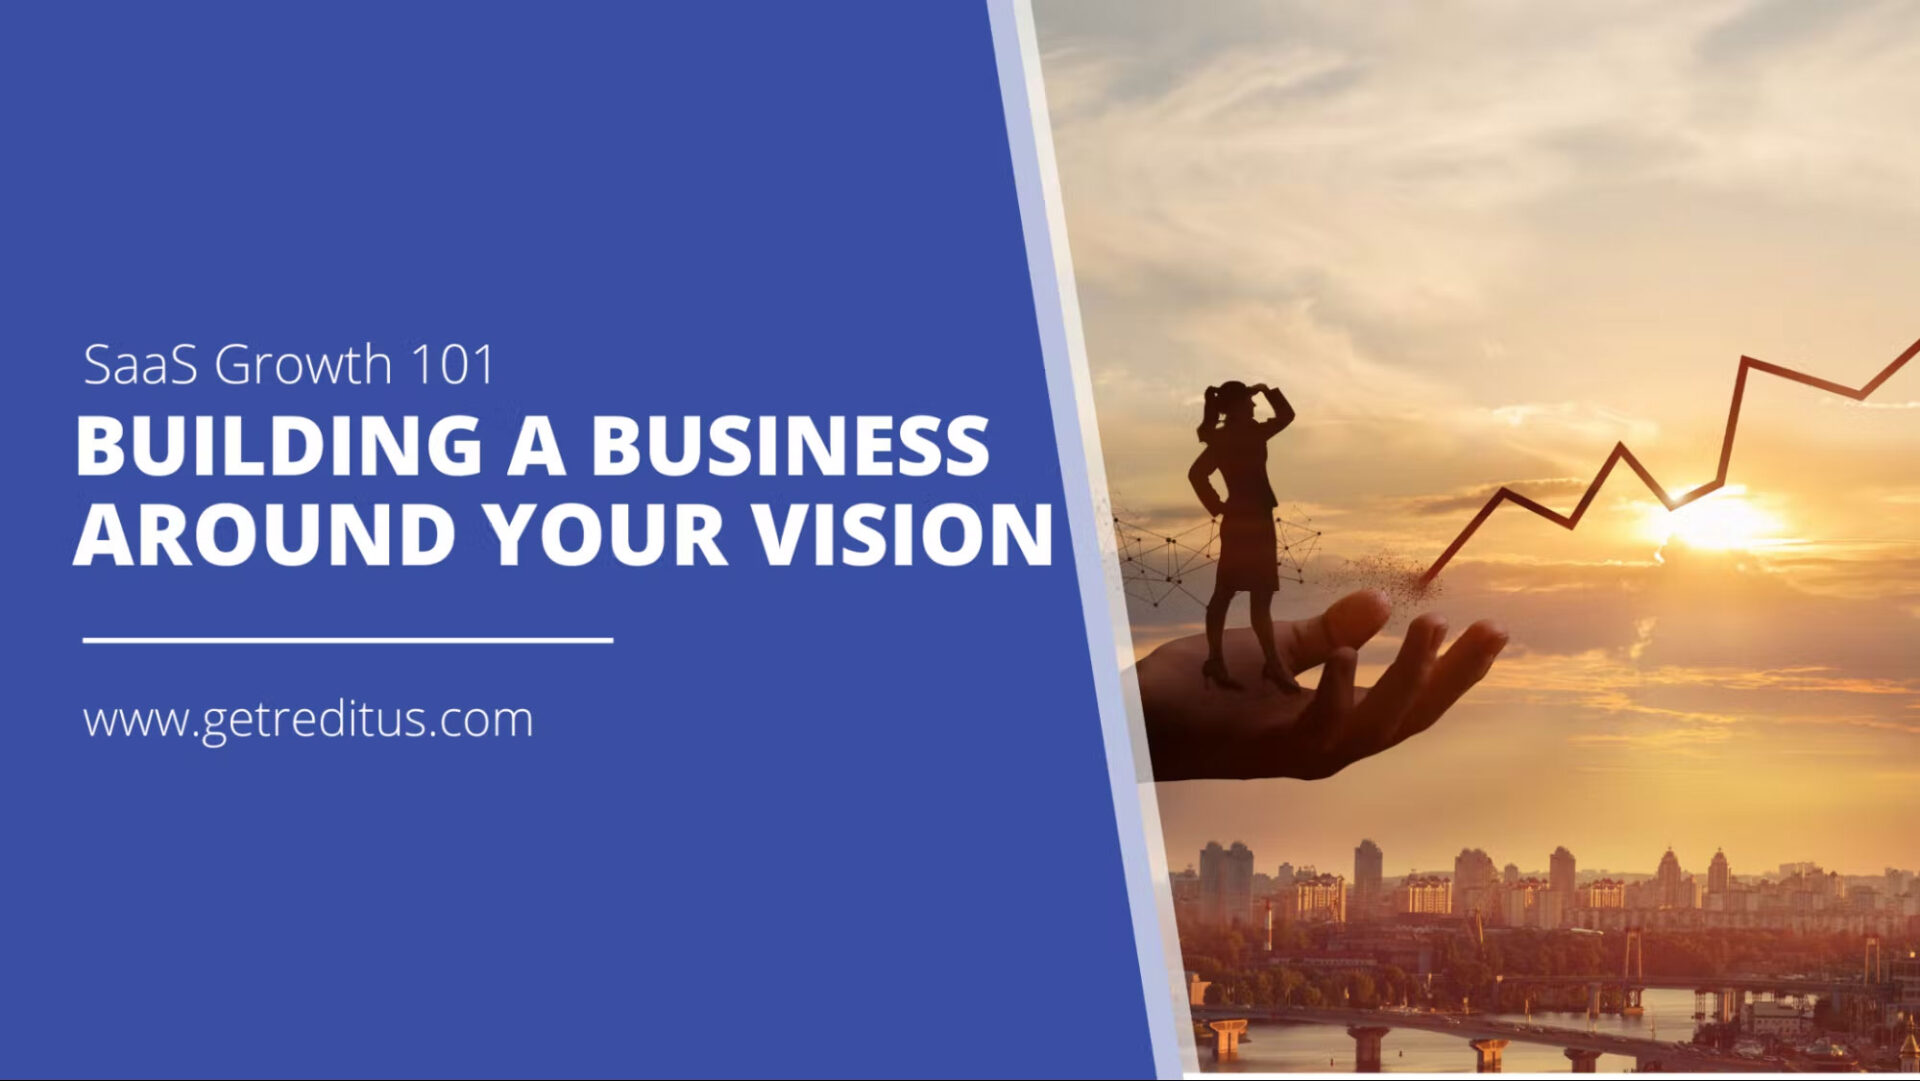 https://www.getreditus.com/blog/saas-growth-101-build-a-business-around-your-vision/